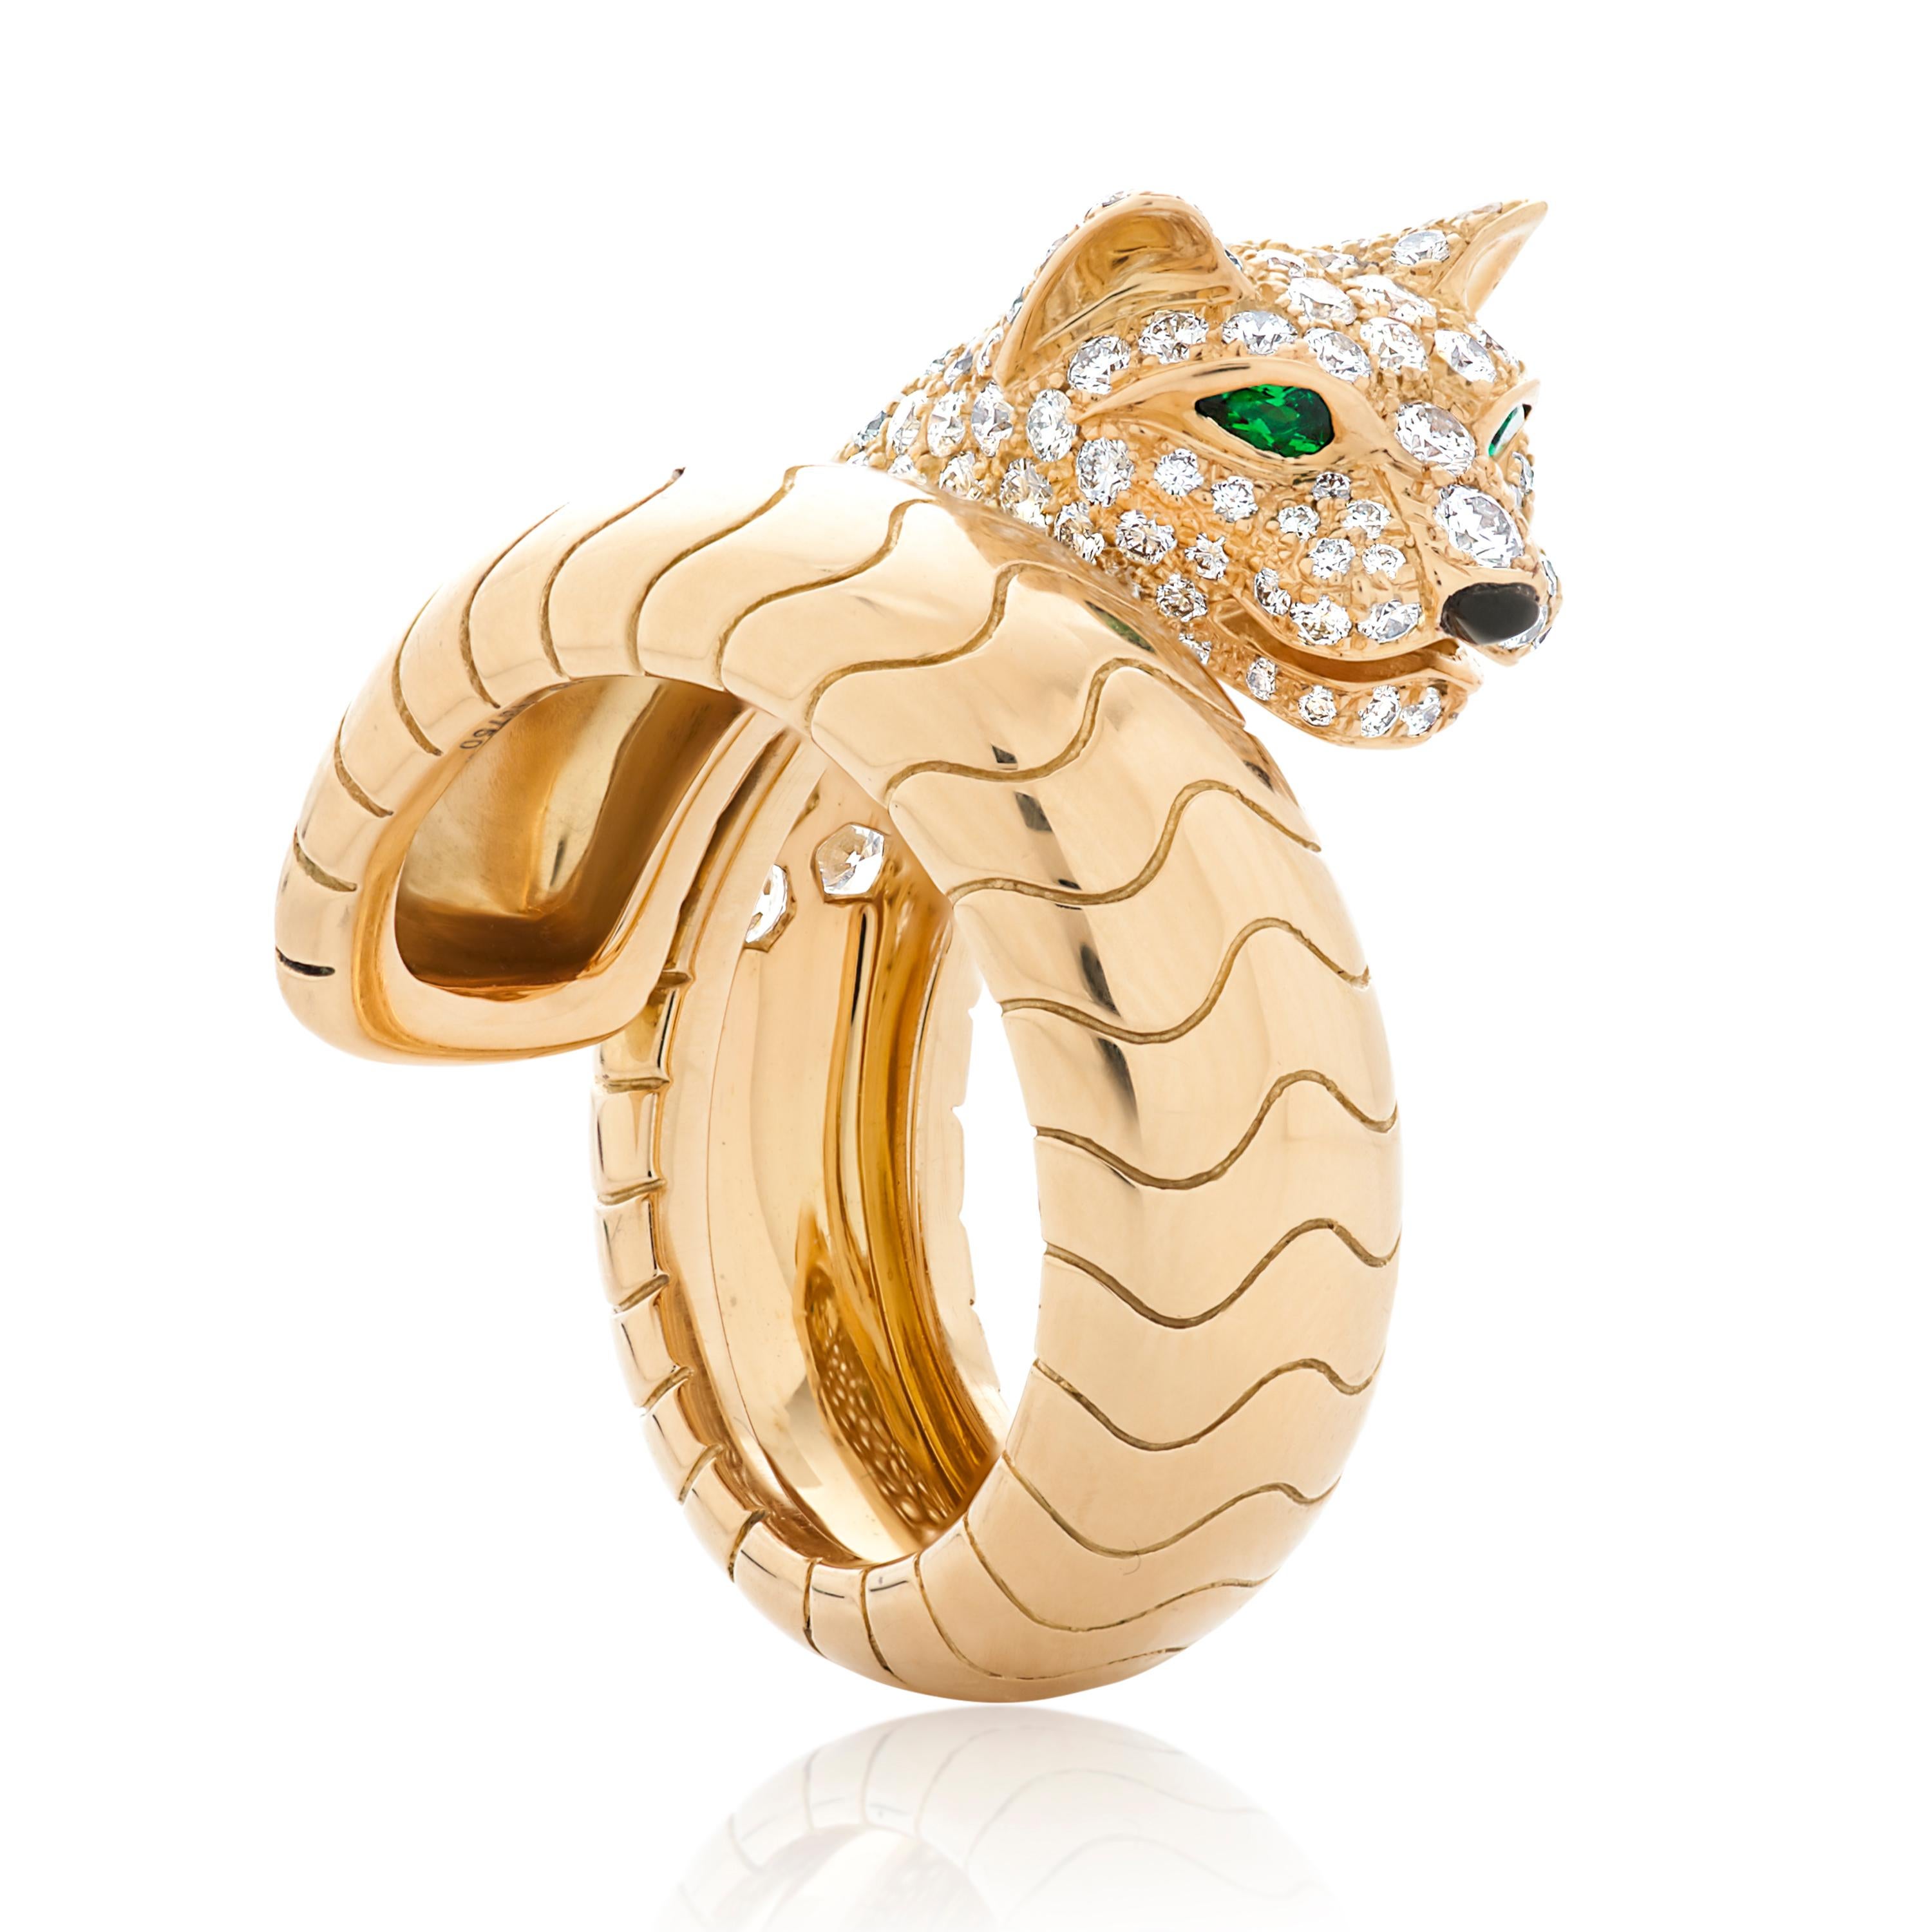 Panthere De Cartier diamond panther head bypass ring set in 18k yellow gold.  

This ring features approximately 2.00 carats of pave set round brilliant cut diamonds with F-G color and VS clarity, as well as emerald and onyx accents. 

The total